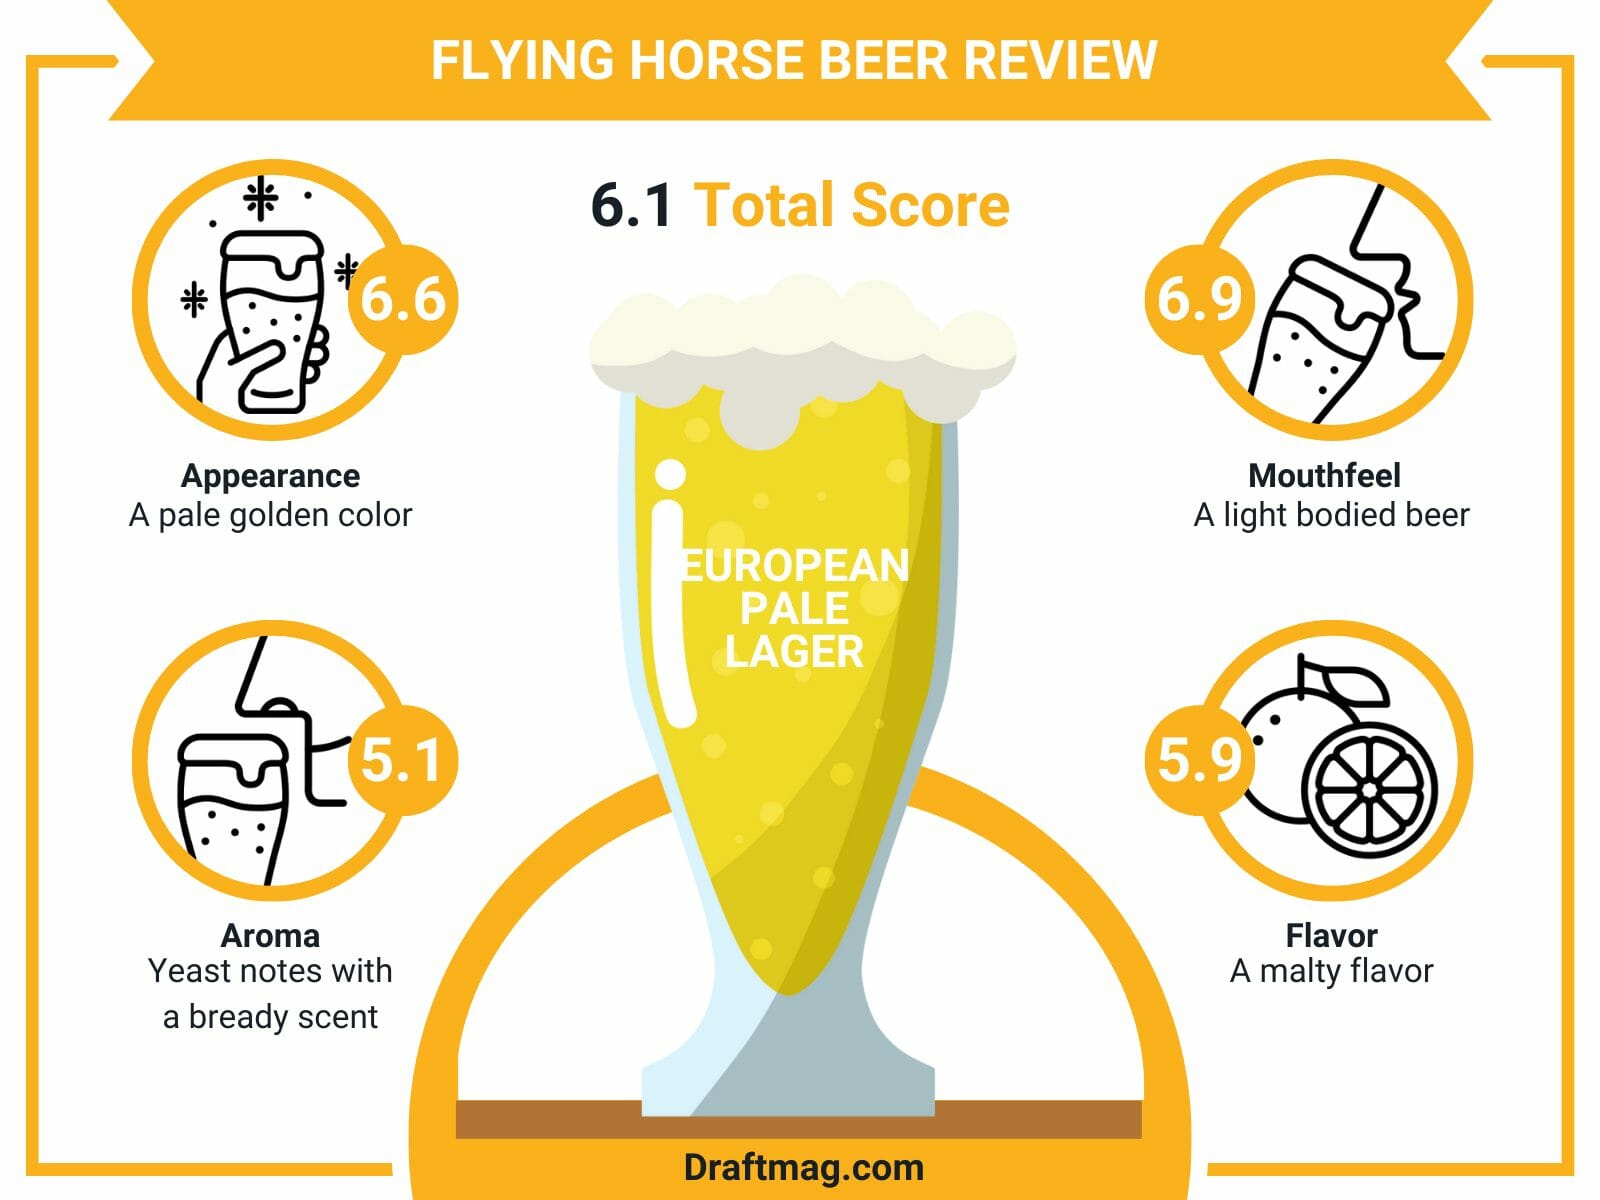 Flying Horse Beer Review Infographic